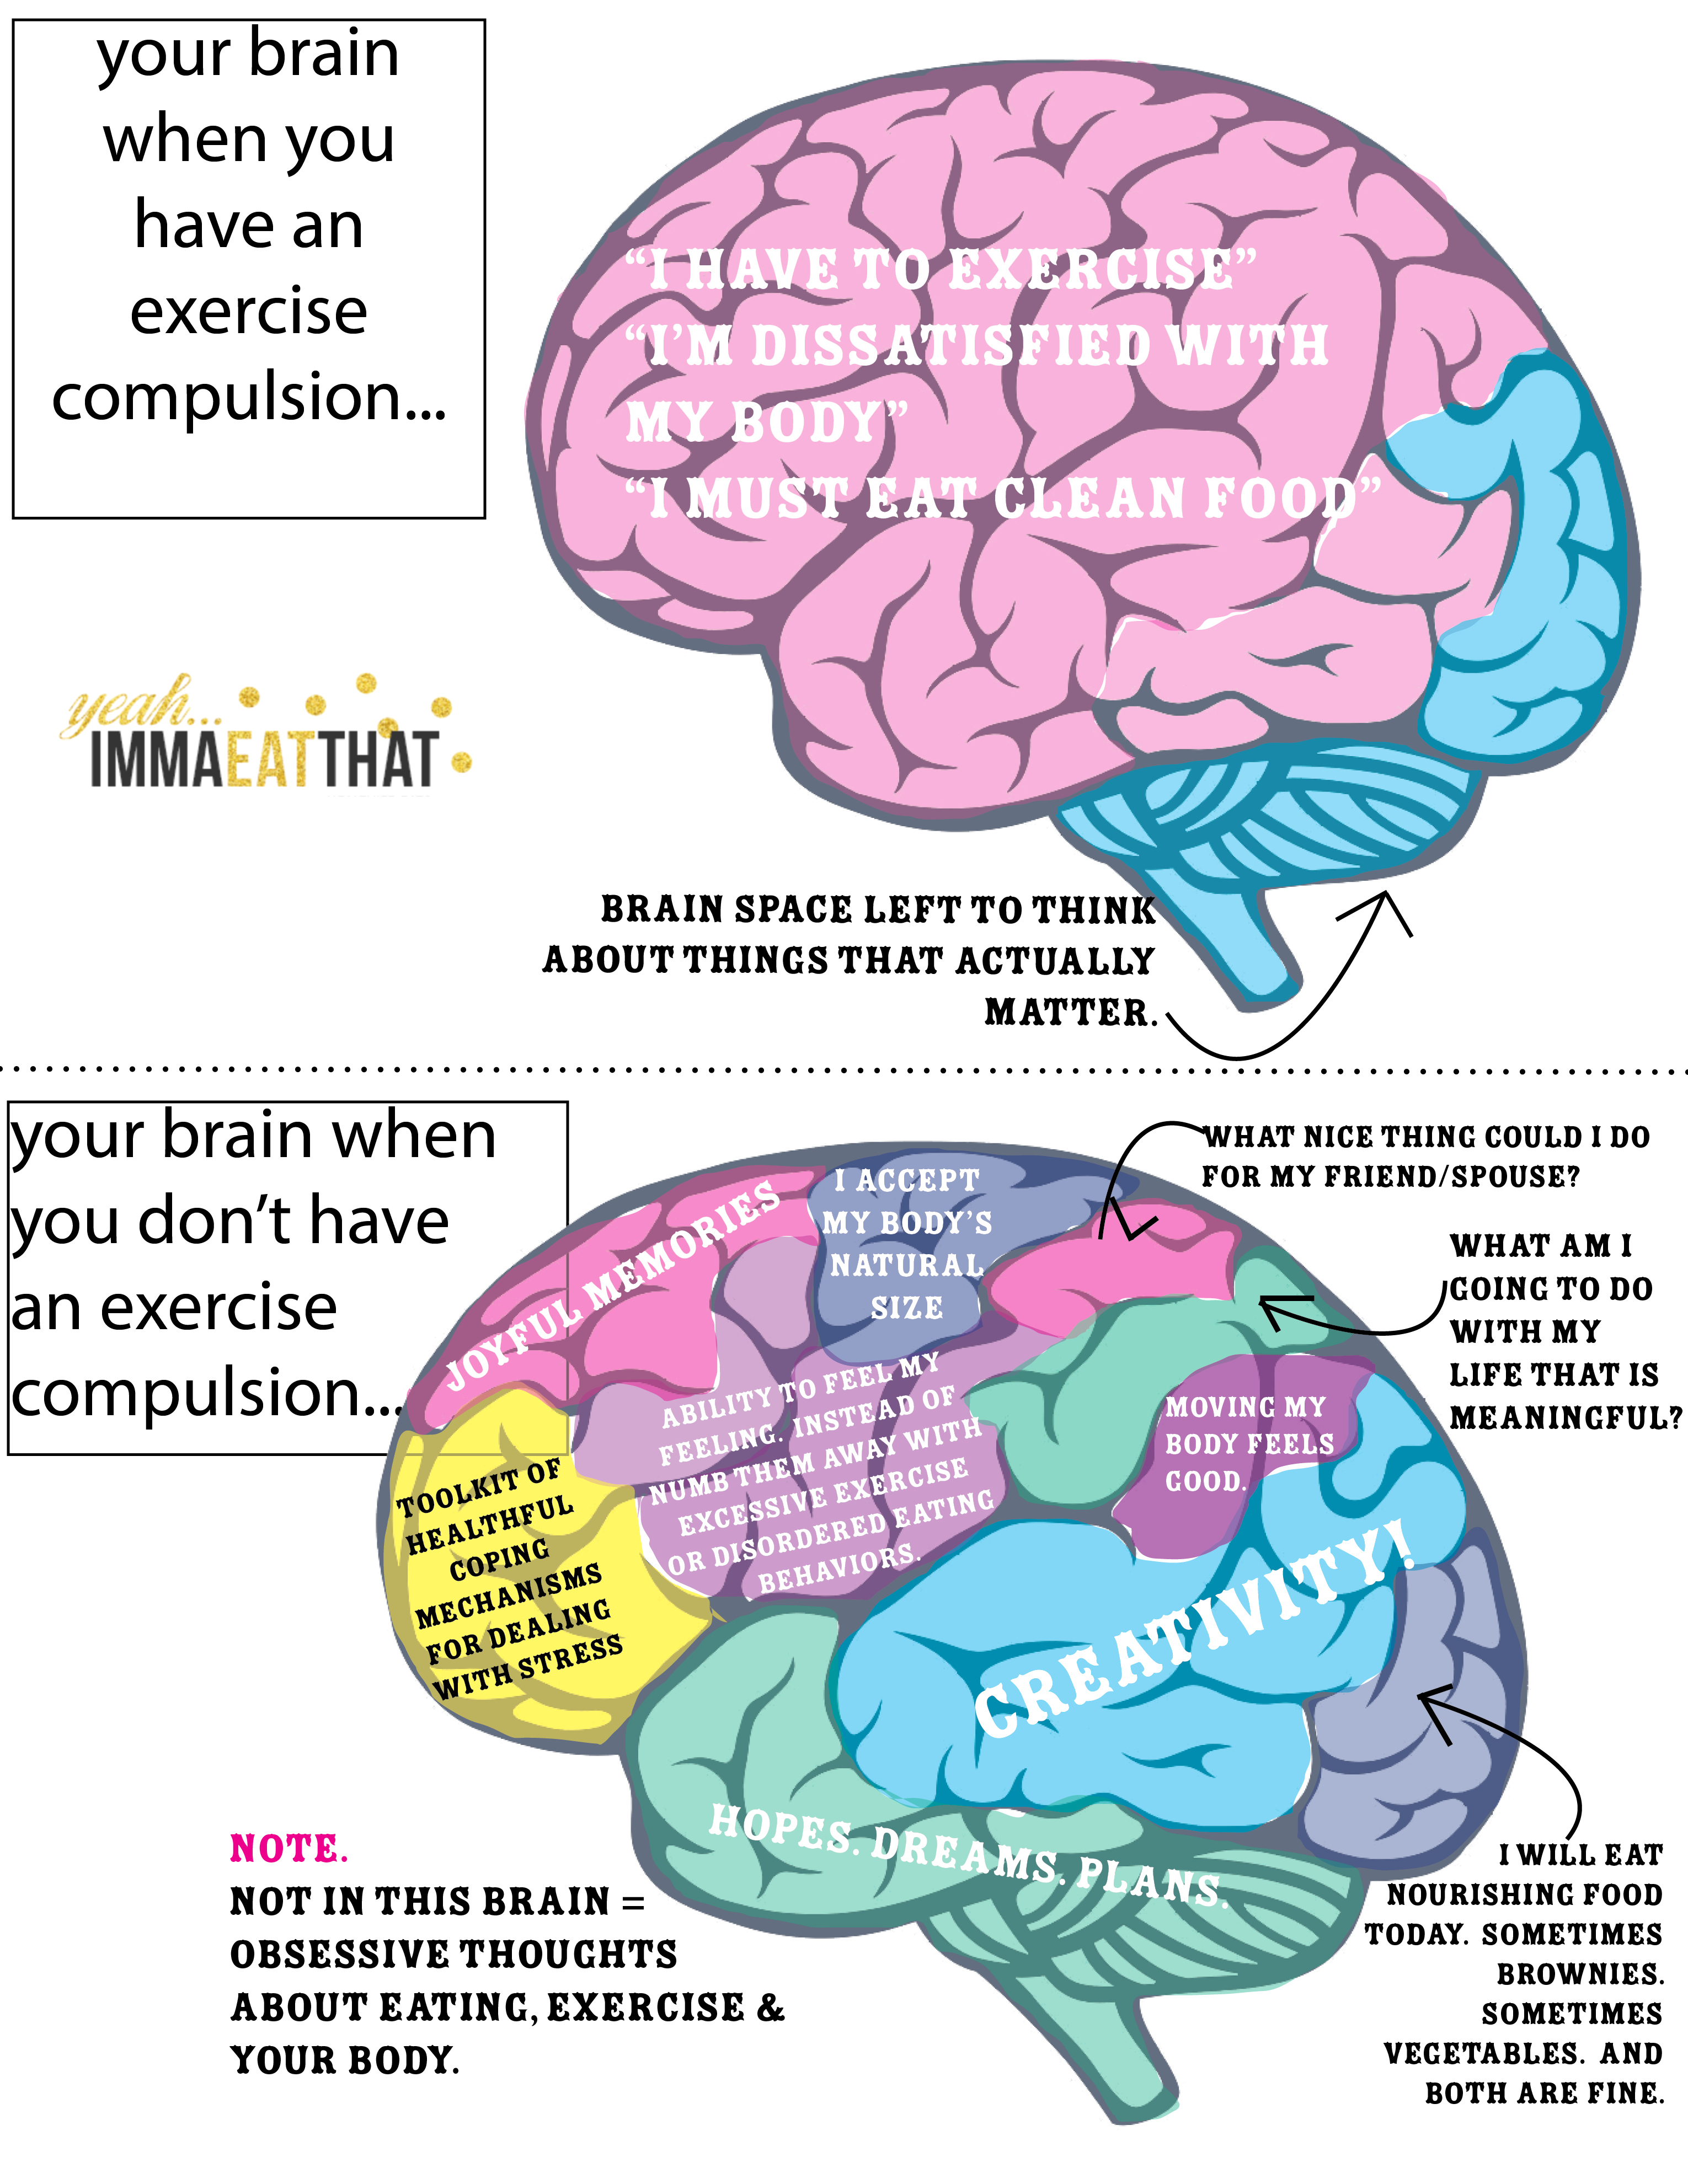 your brain when you have an exercise compulsion vs when you don't | immaEATthat.com